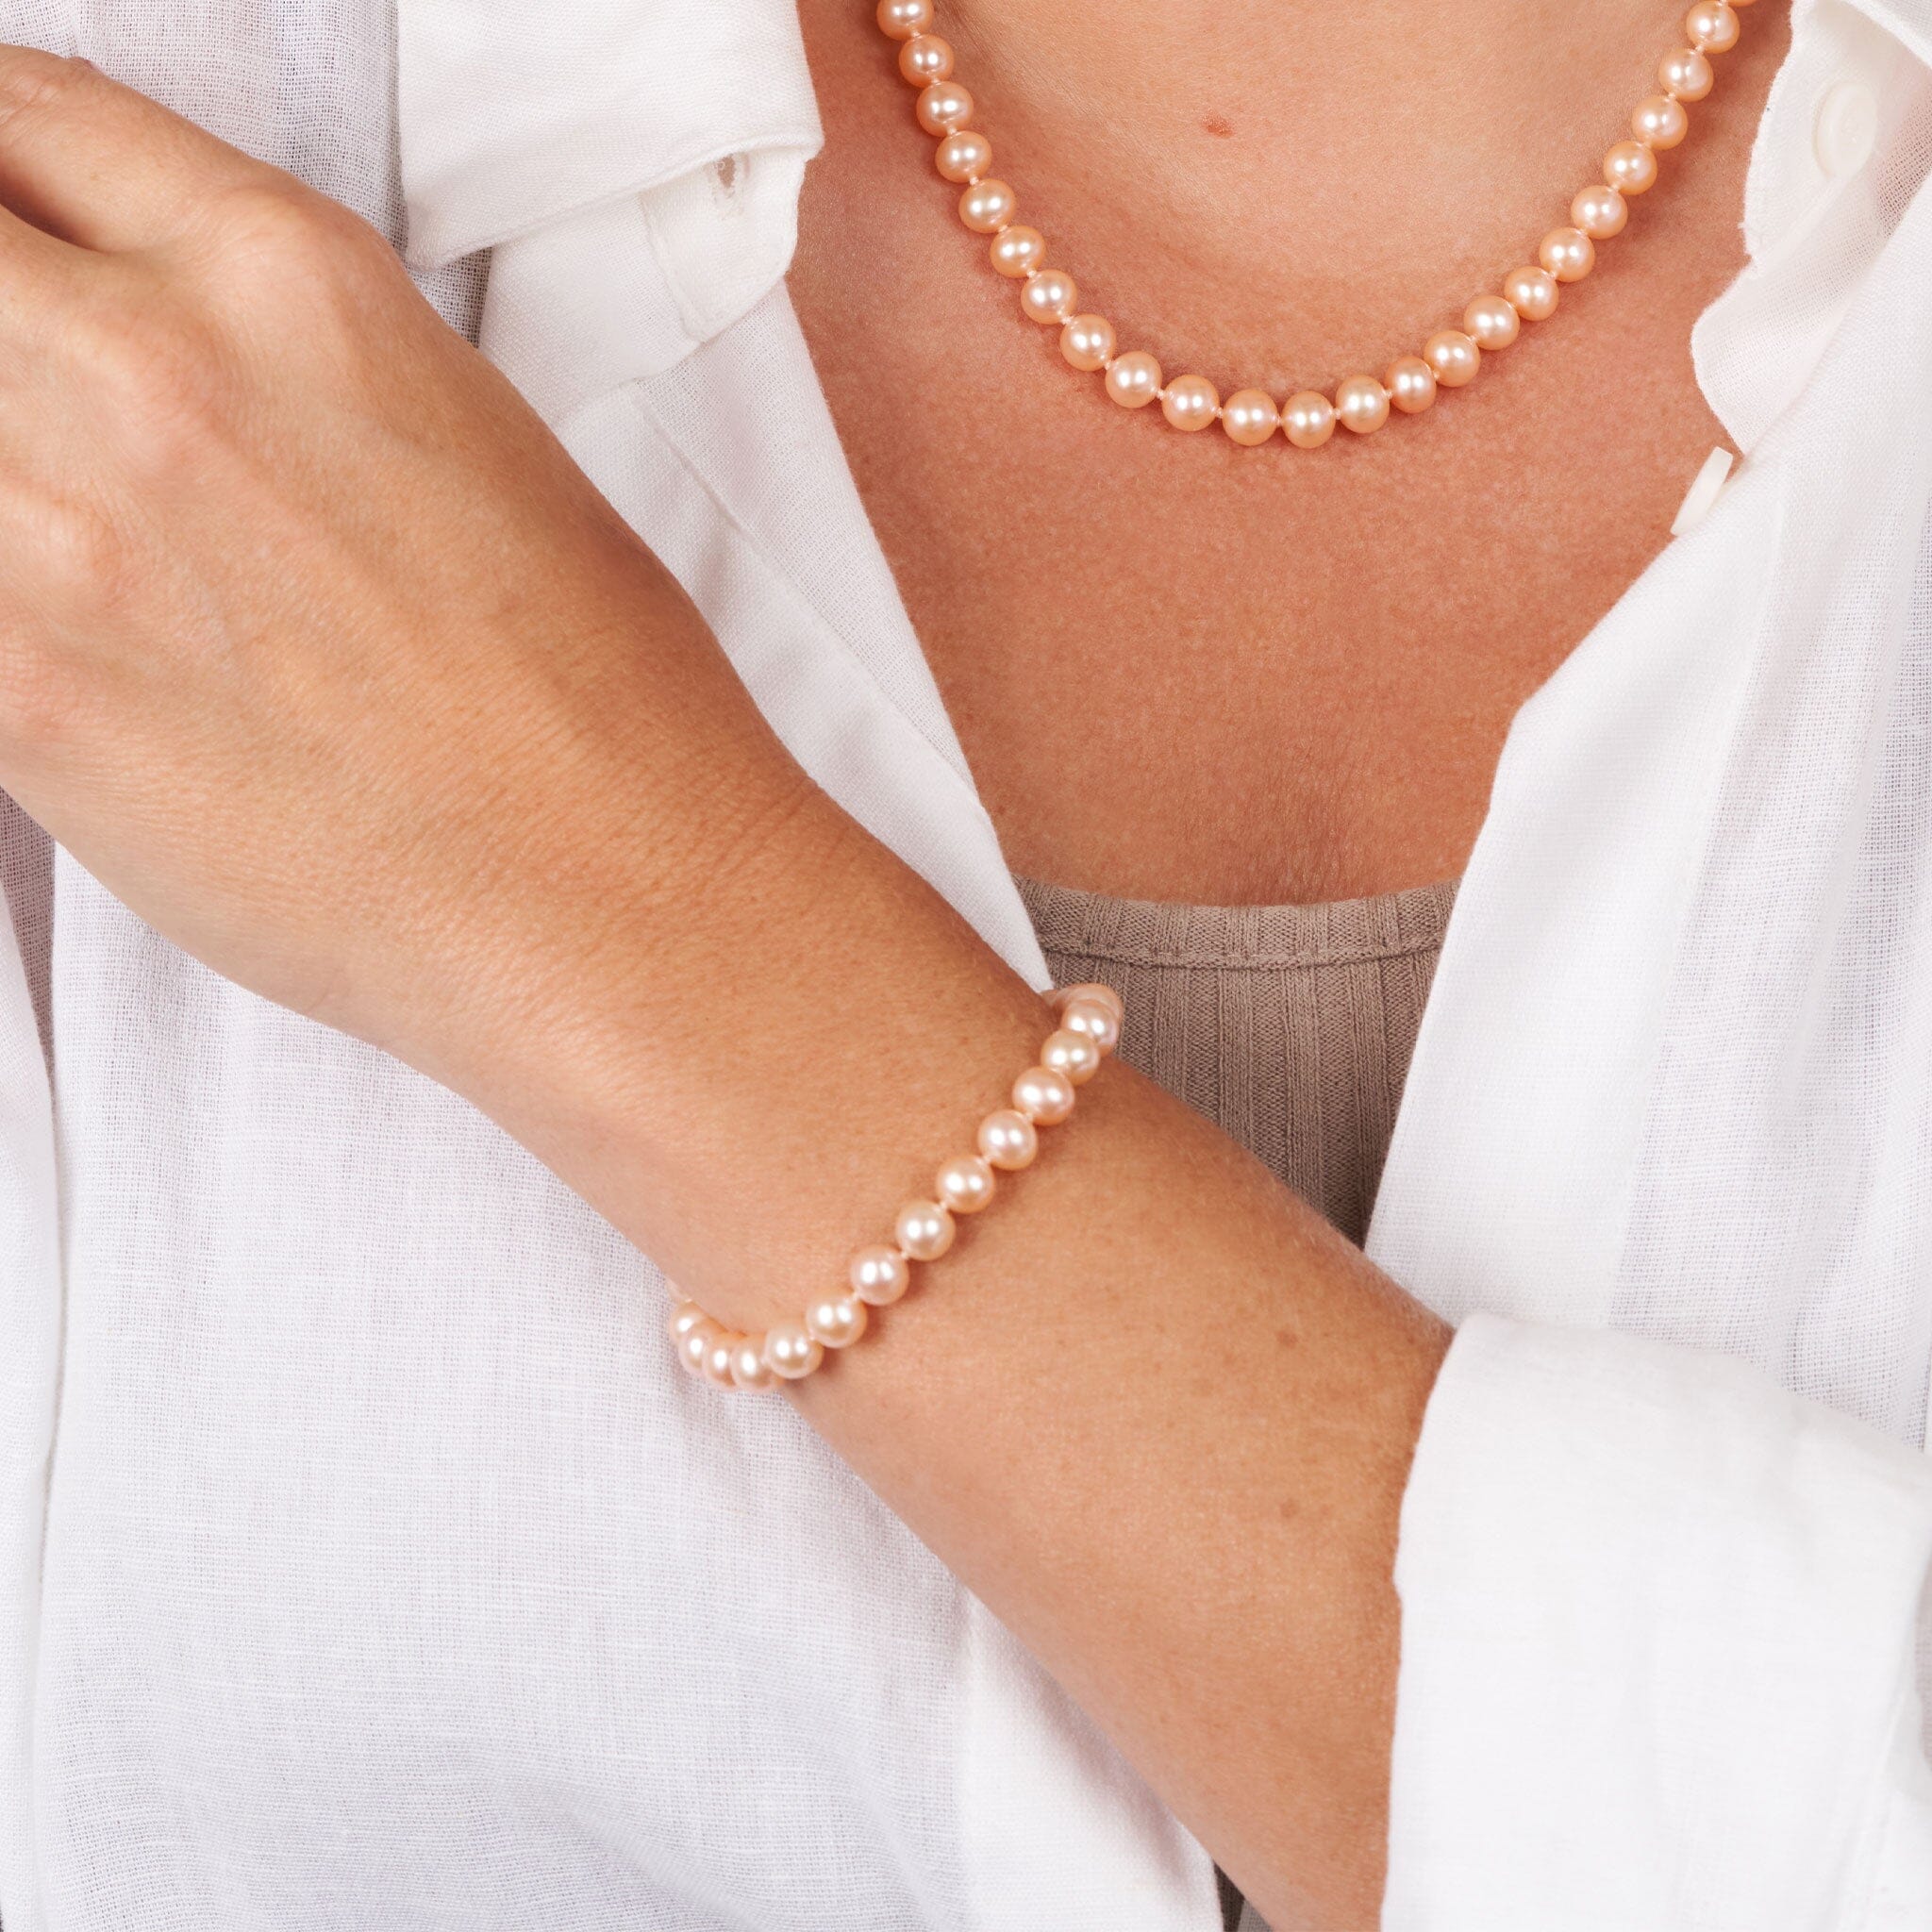 6.5-7.0 mm AAA Pink to Peach Freshwater Pearl Bracelet